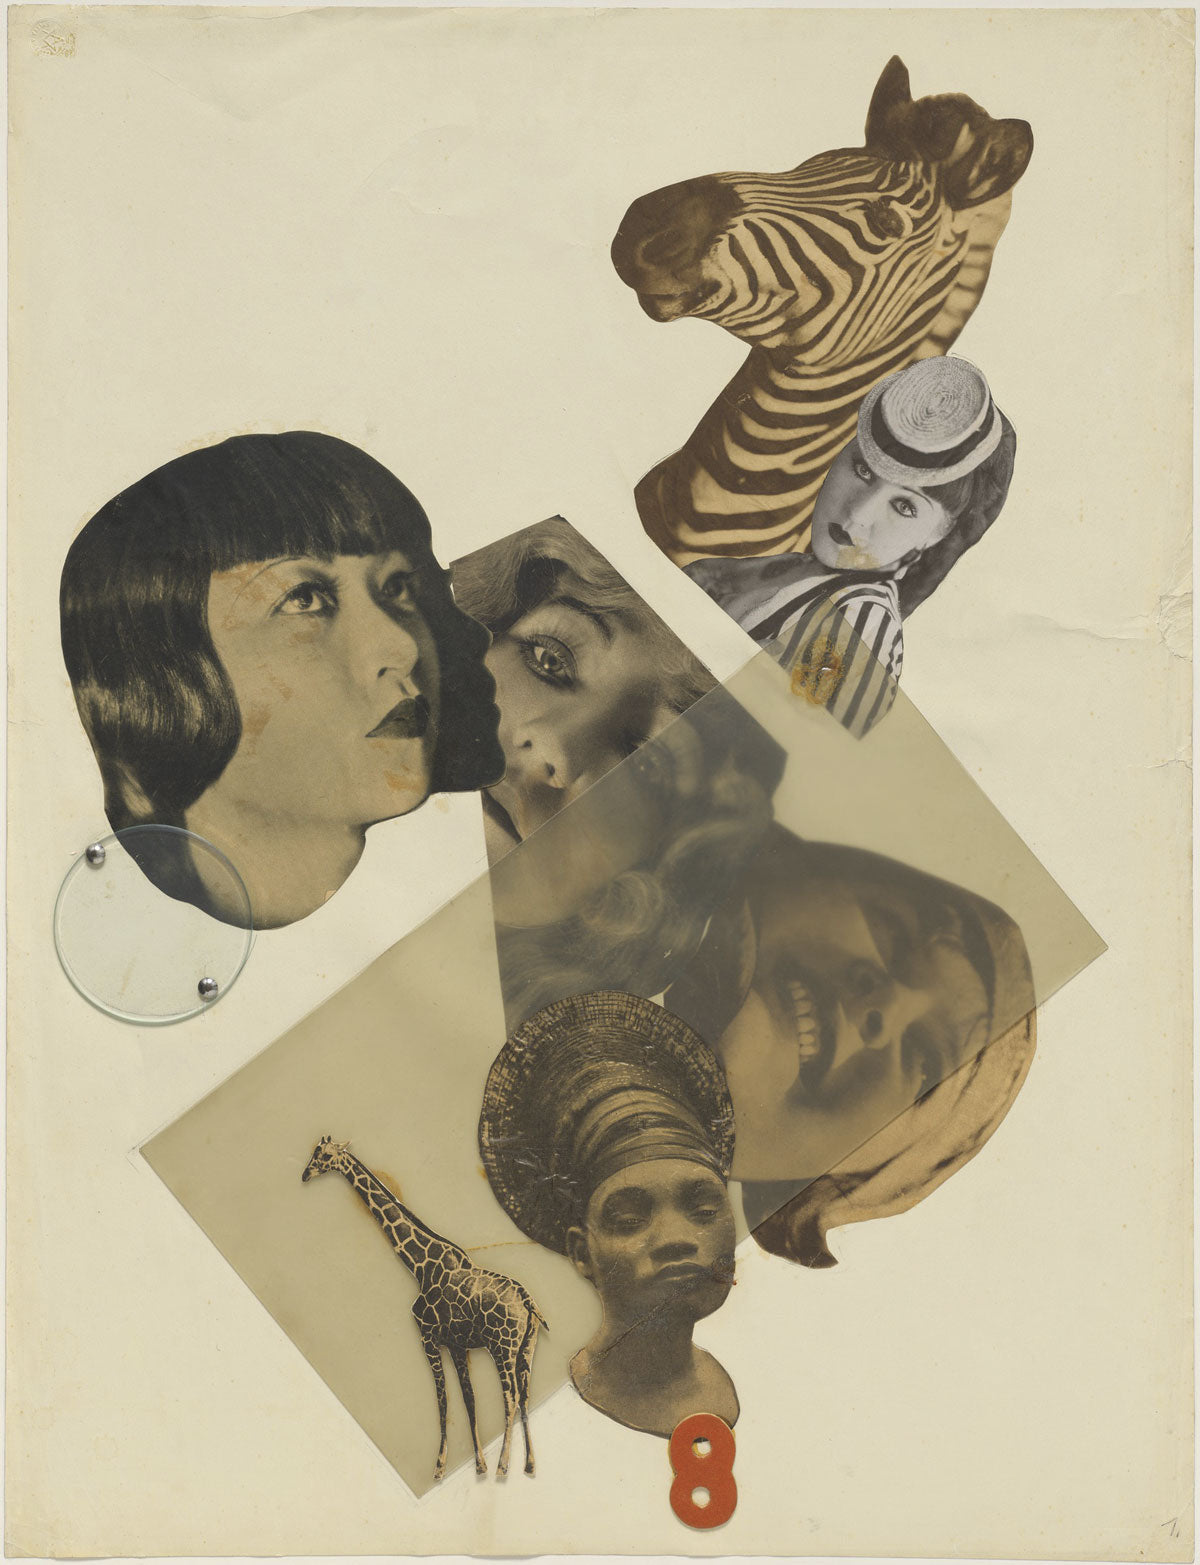 Marianne Brandt, Untitled (with Anna May Wong), 1929. Paper cutout collage and prints and cellulose acetate, glass, metal rivets, and flock printing on paper. 